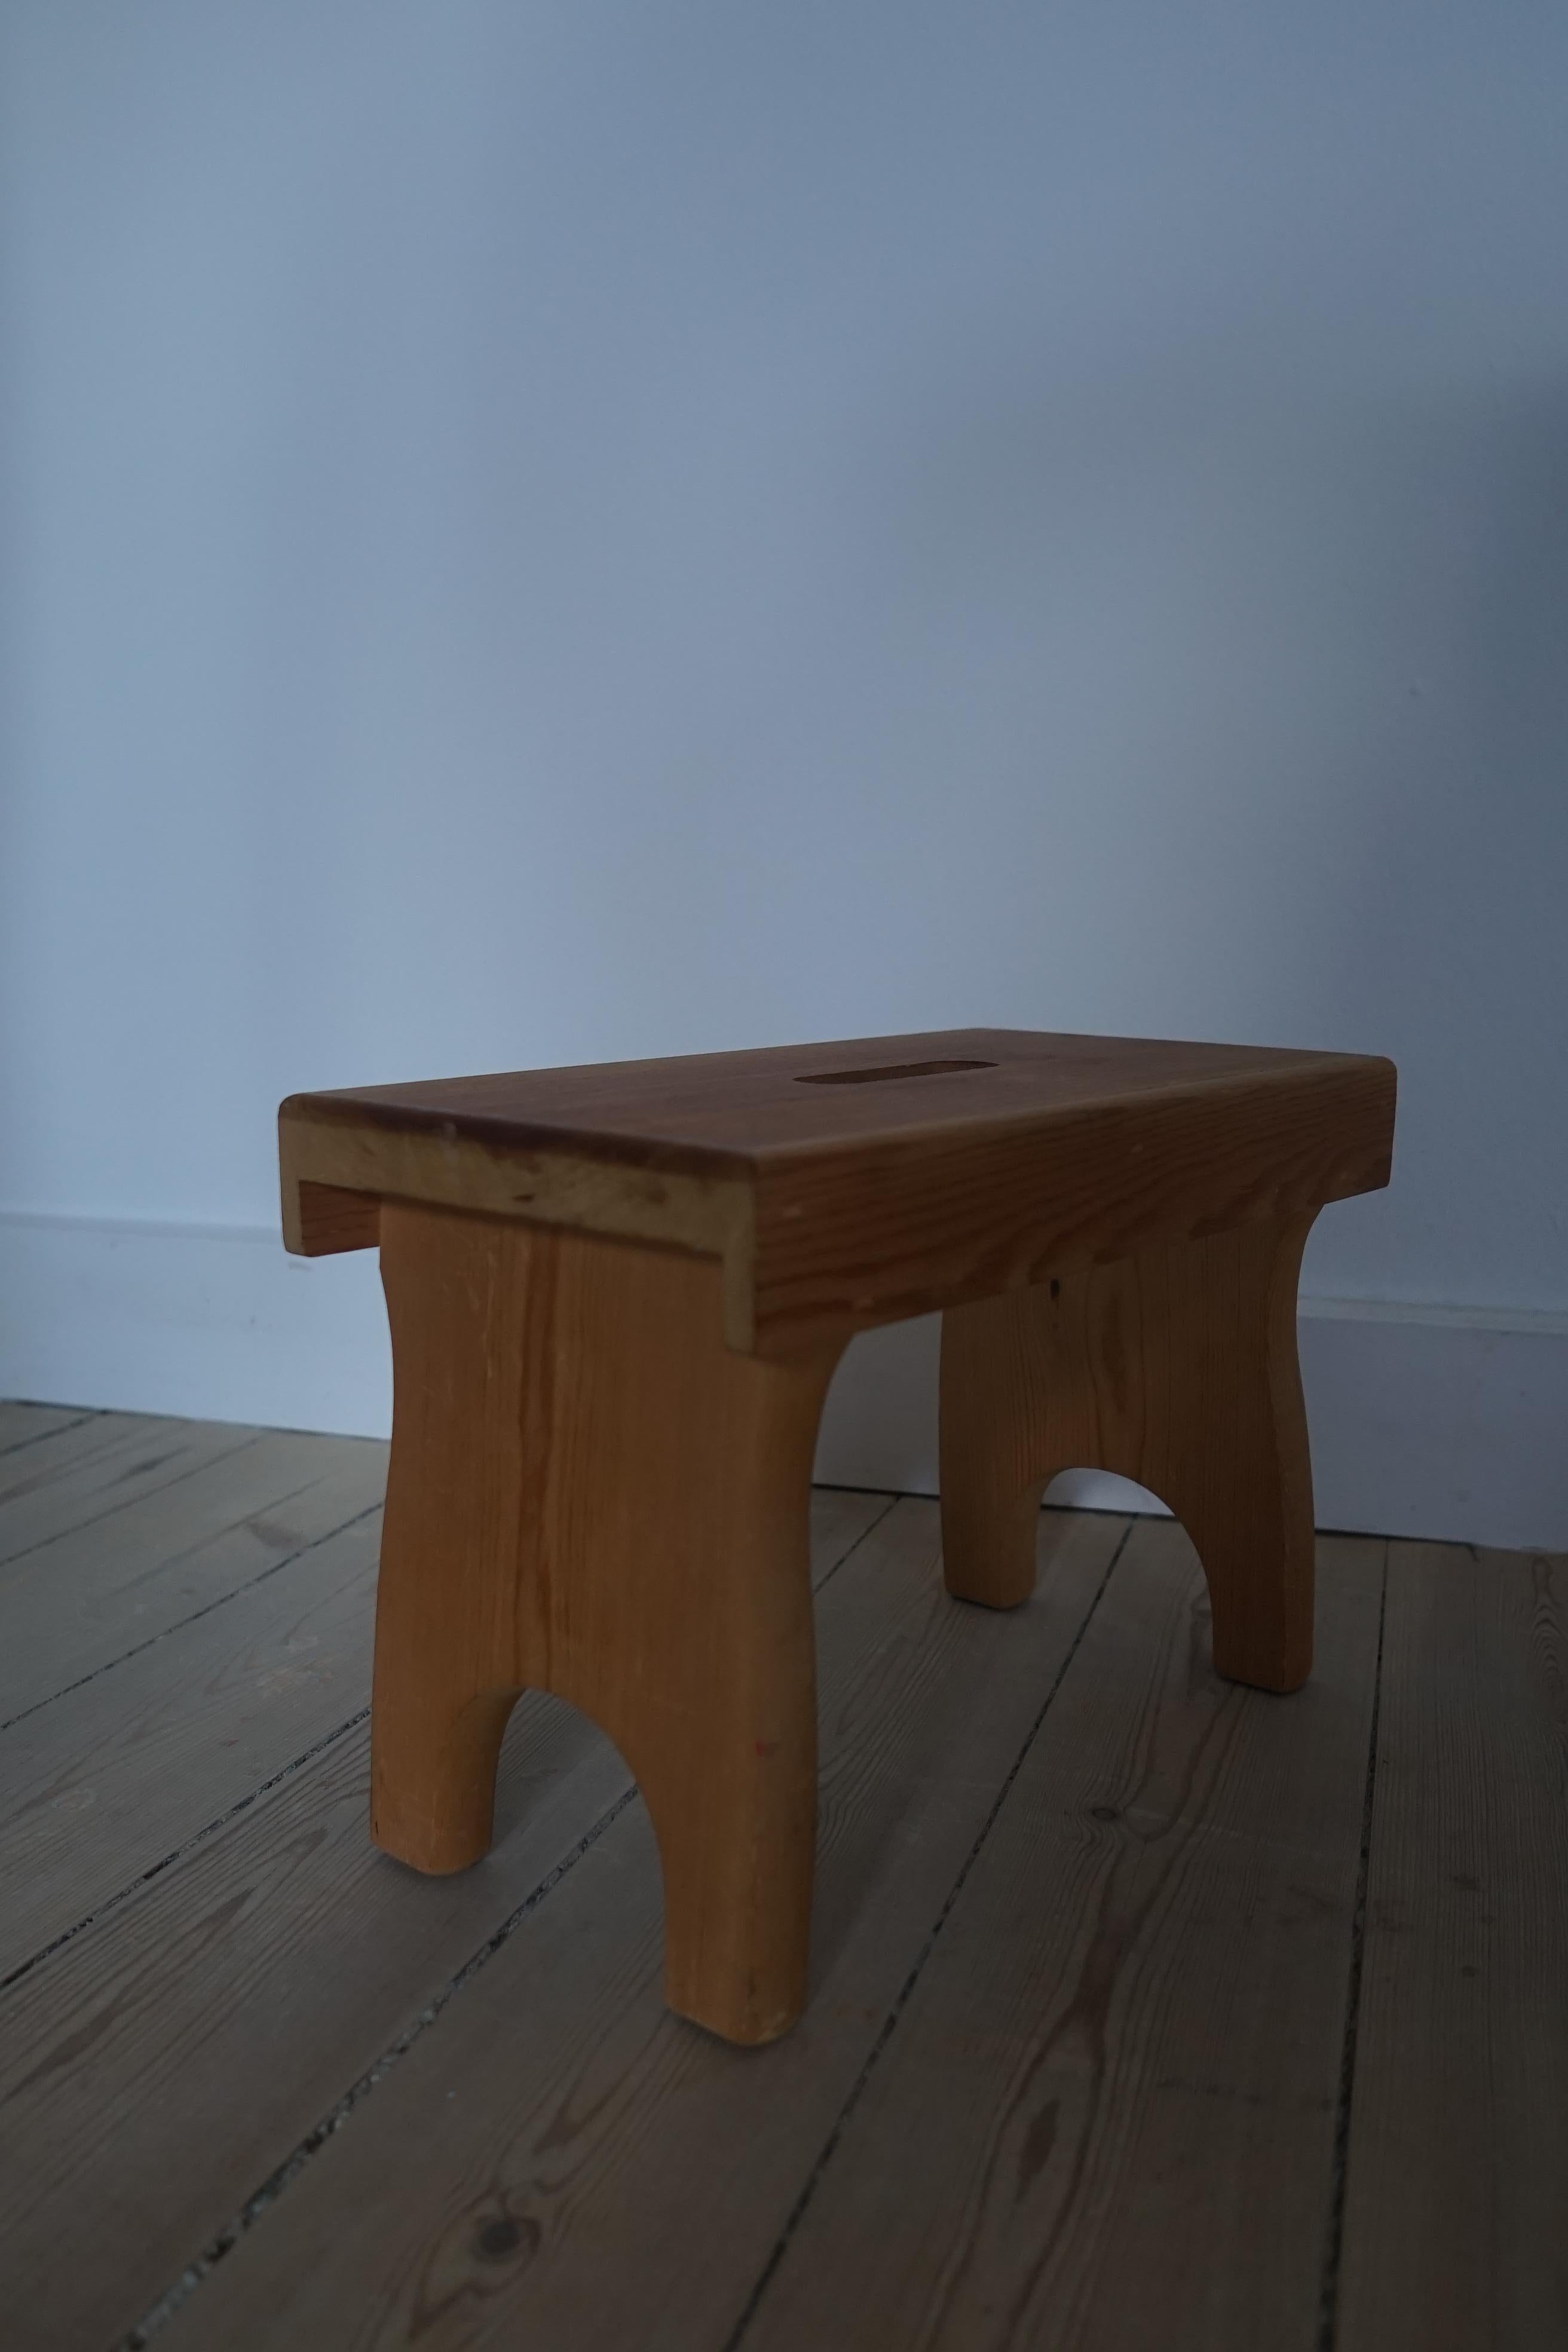 Danish Brutalist pine stool in wabi sabi style made in the 1960s by a unkown danish manufacter.

This stool is the perfect little foot stool or to be used as a pedestal for a lamp or a vase or some candle holders.

The stool has similarities to